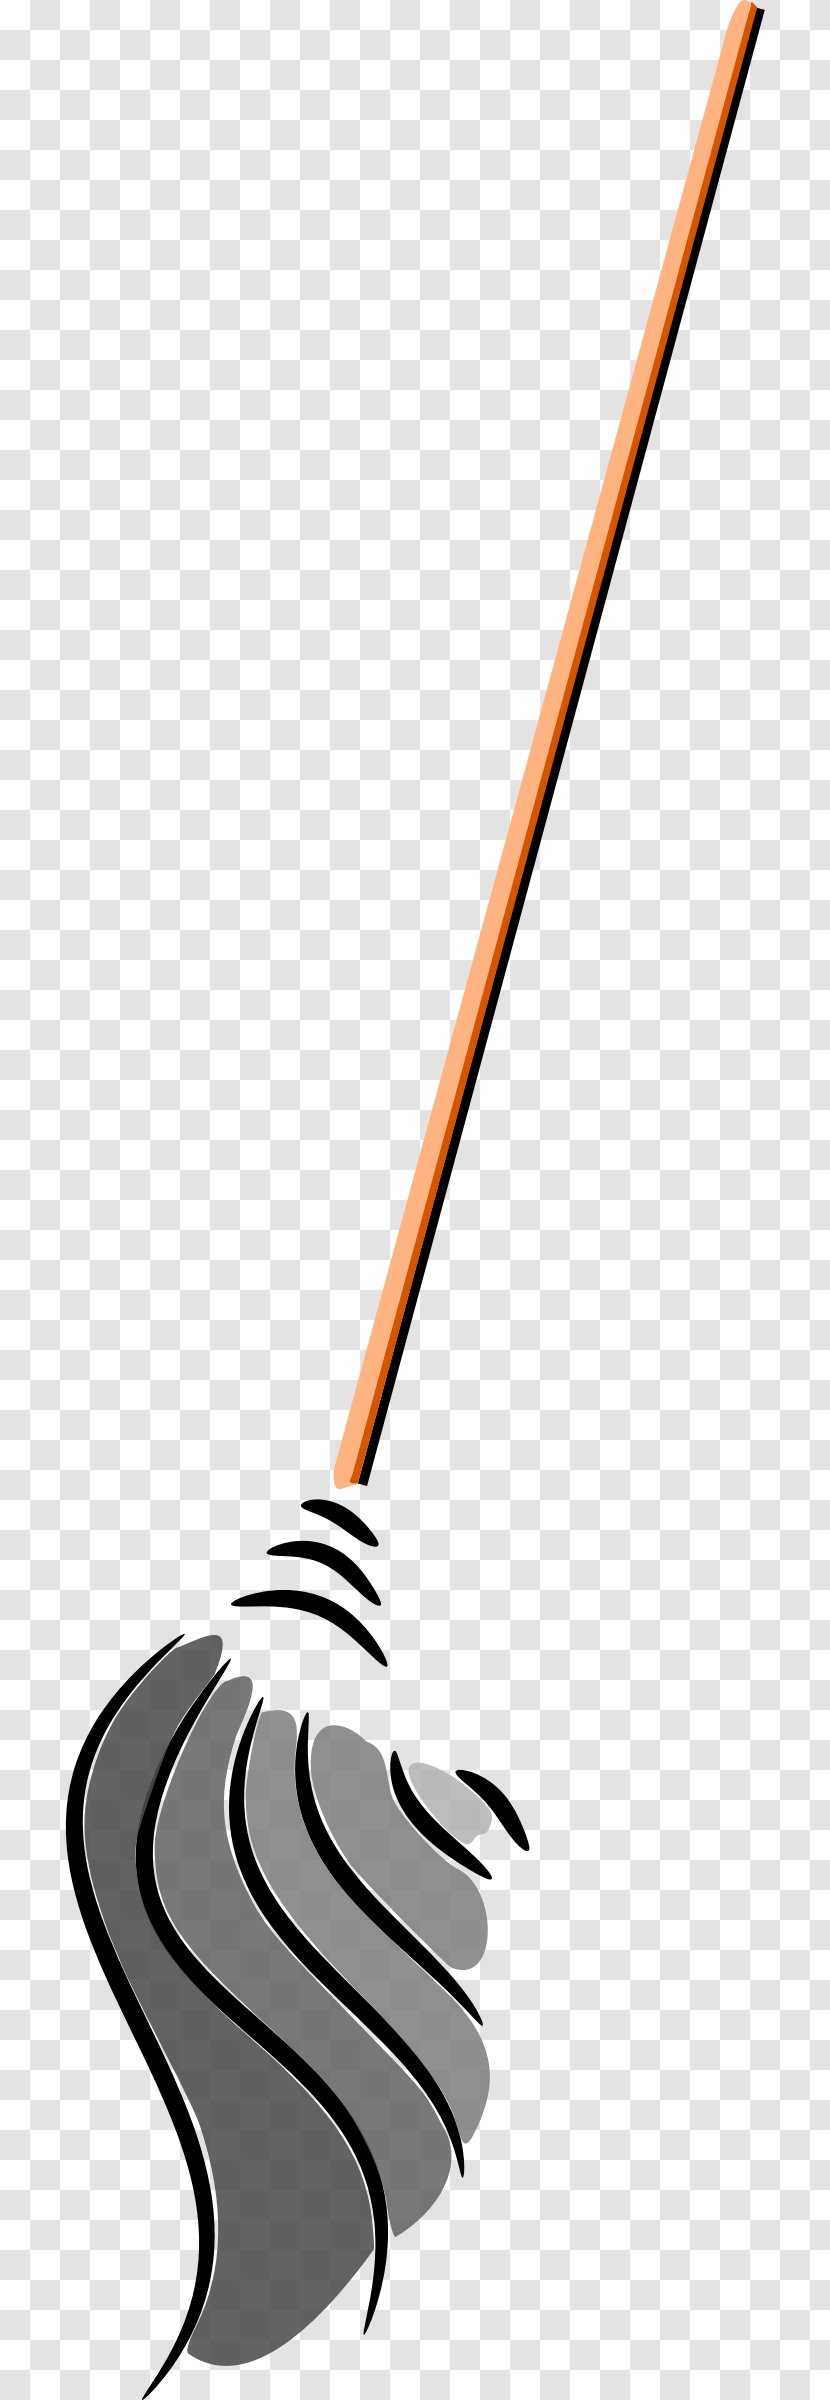 Mop Cleaning Broom Bucket Clip Art - Squeegee Transparent PNG